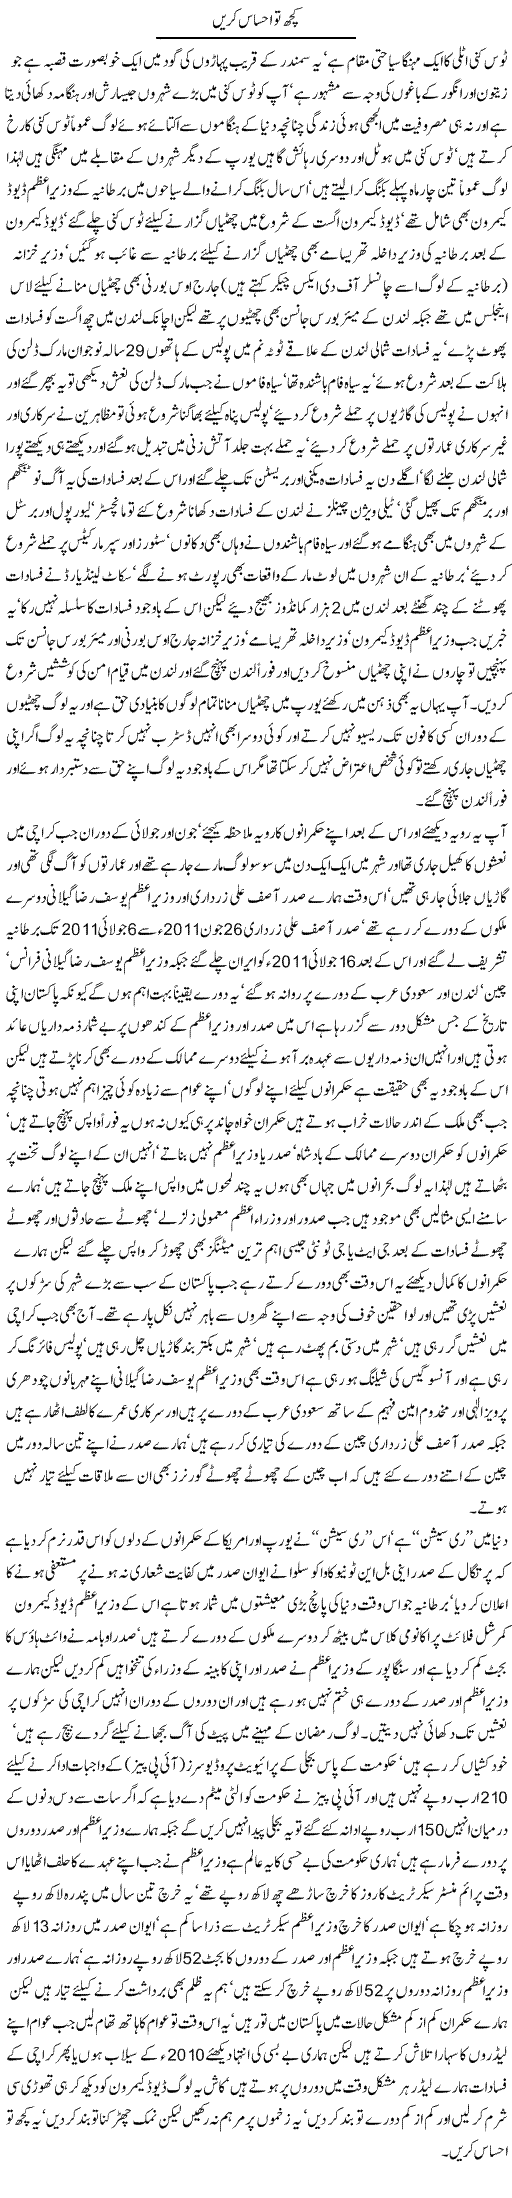 London Riots Express Column Javed Chaudhry 11 August 2011